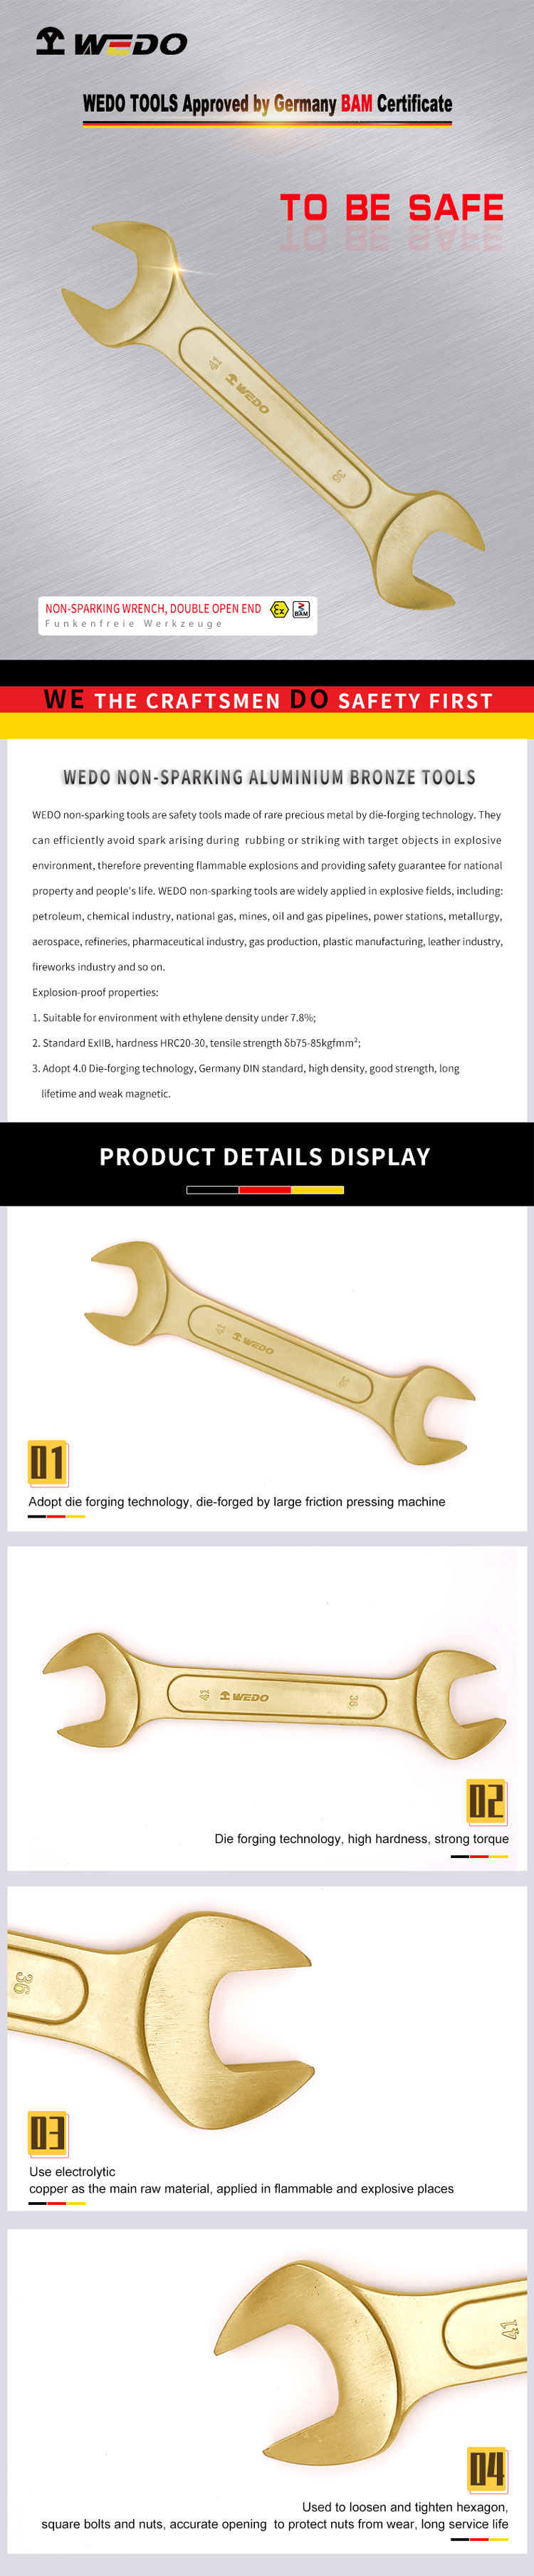 Explosion-proof Groove Double-headed Wrench Al146(图1)